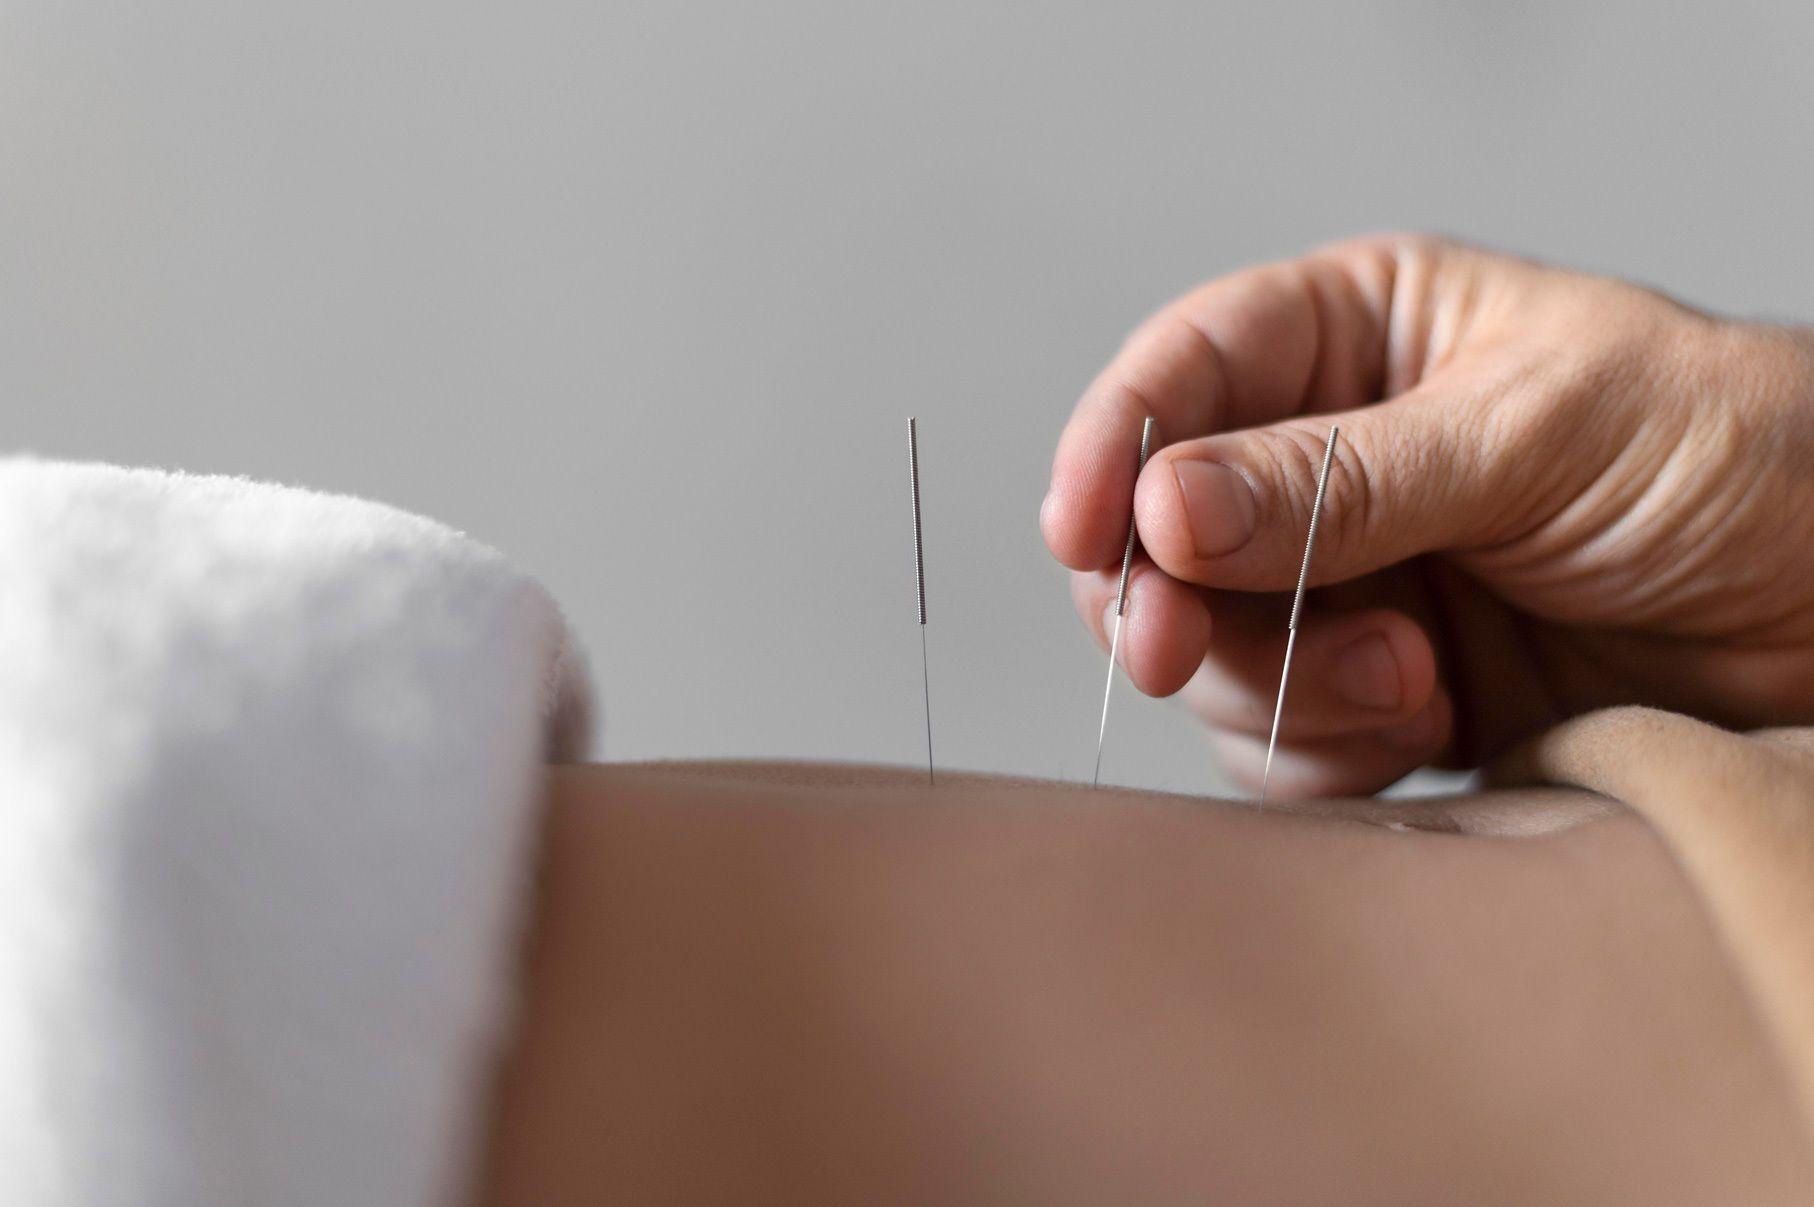 close-up-hand-holding-acupuncture-needle.jpg